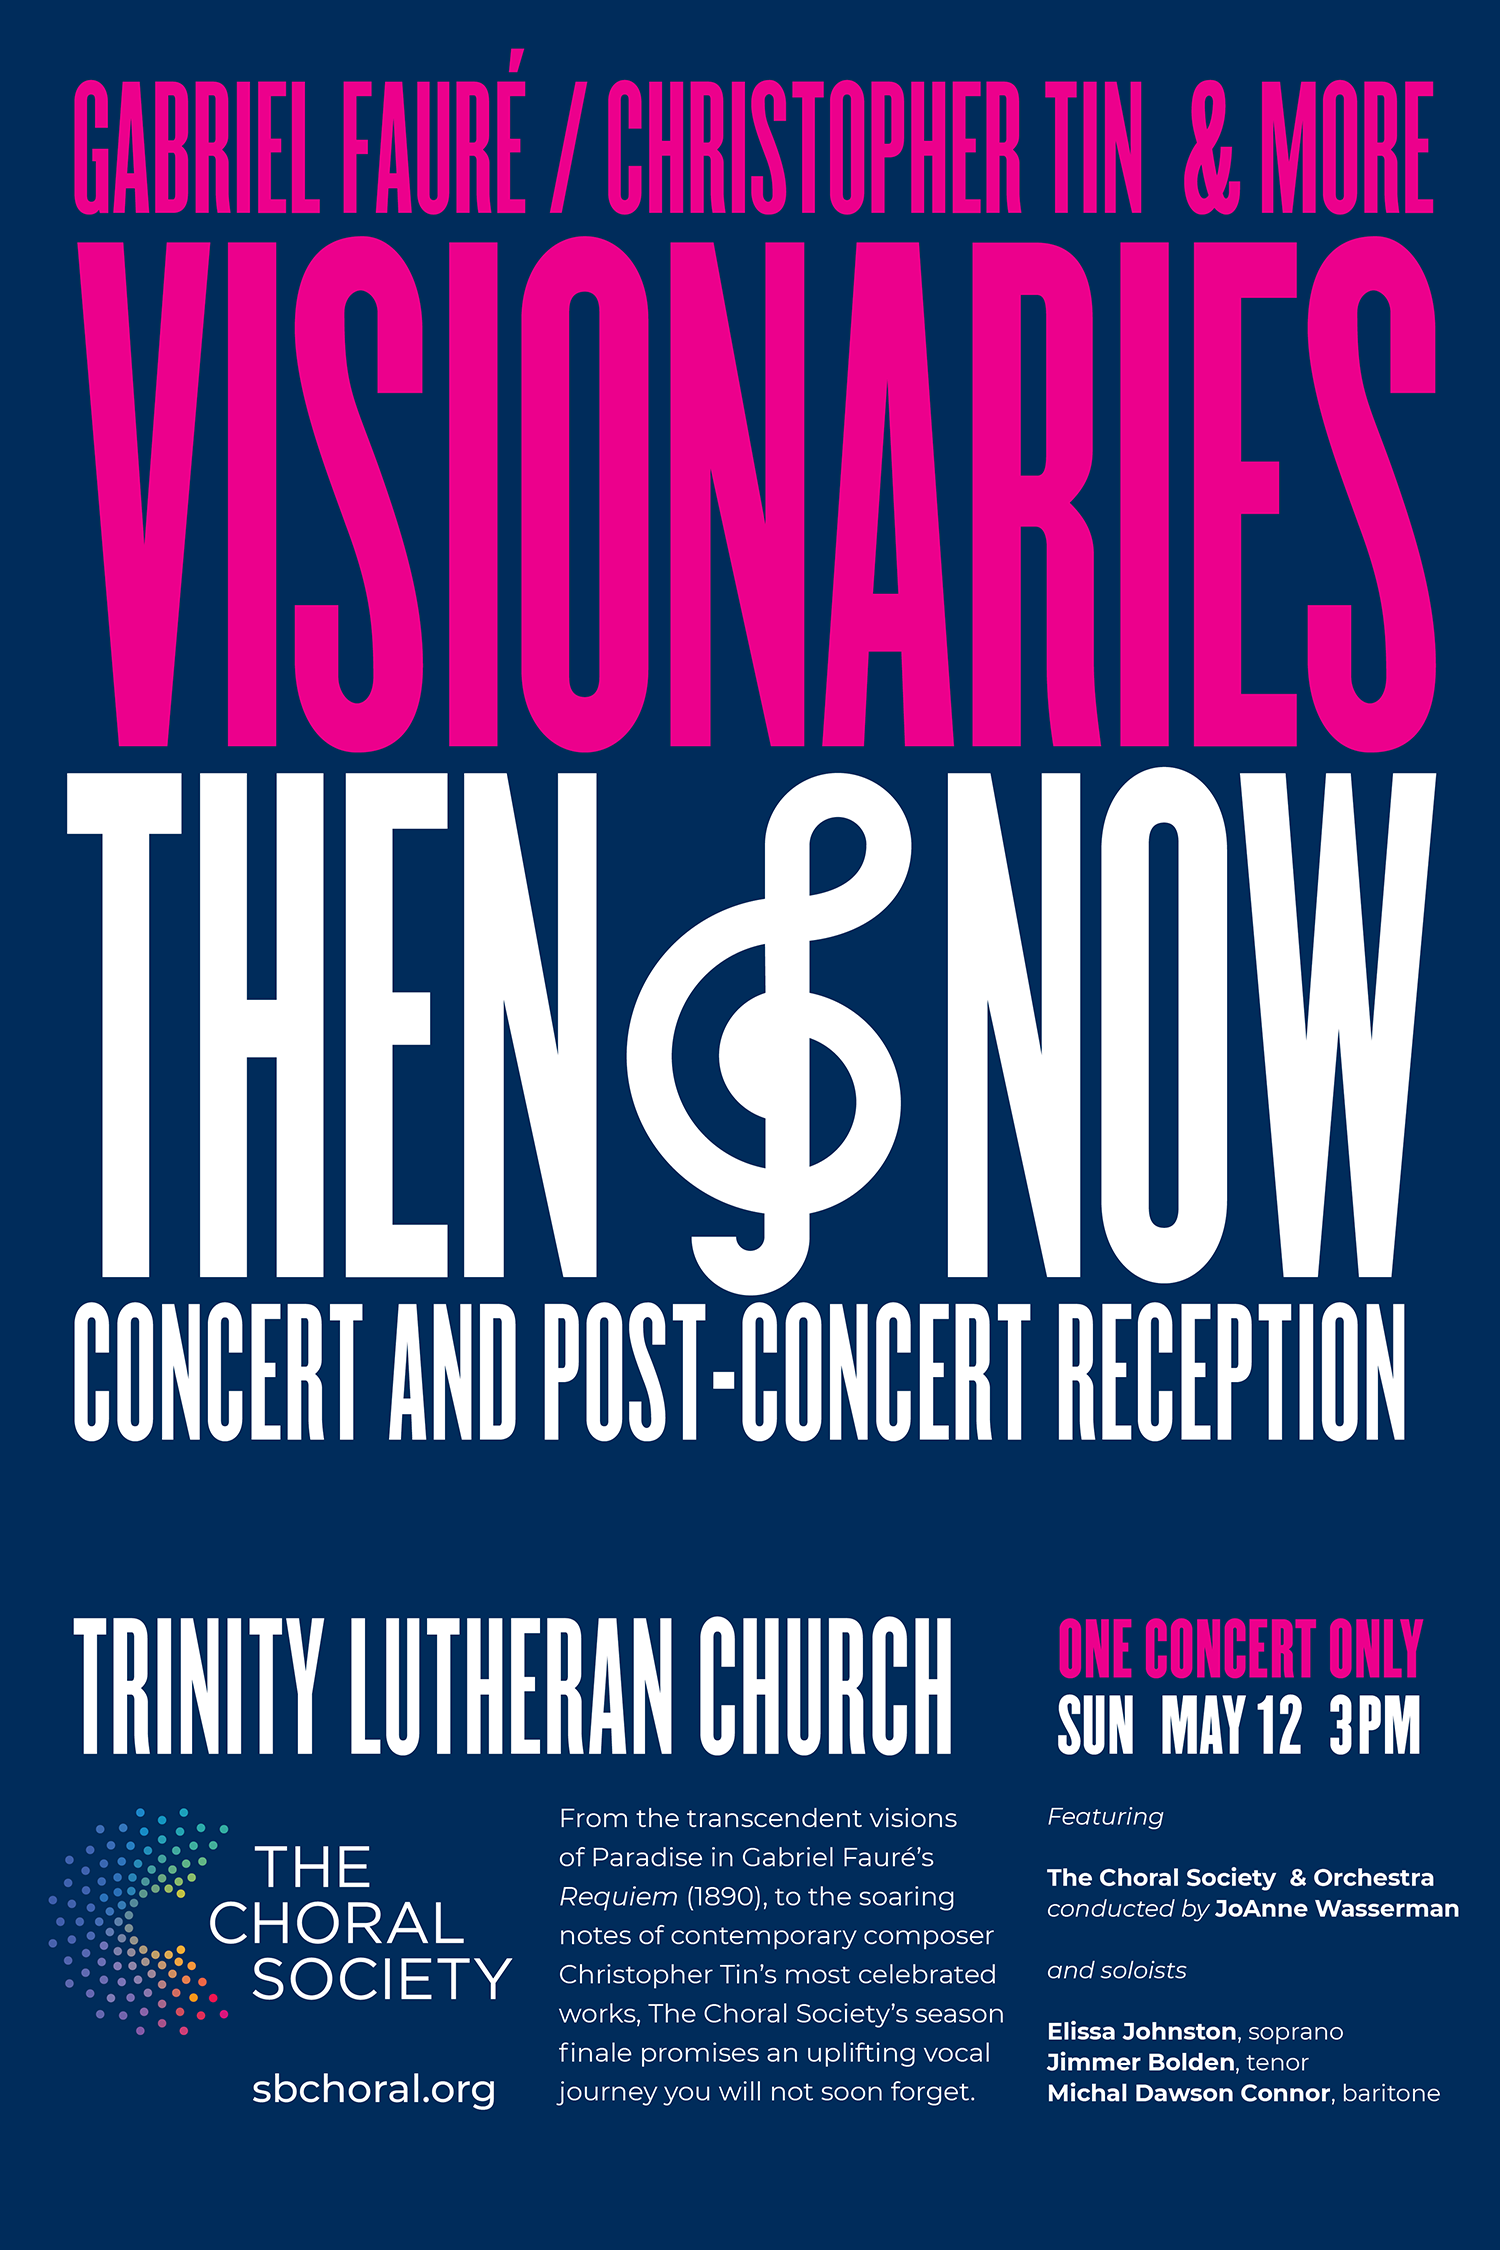 SB Choral's Visionaries Then and Now concert and post concert reception poster. text in all caps on a dark blue background. SB Choral's logo on the bottom left with date location information on the right